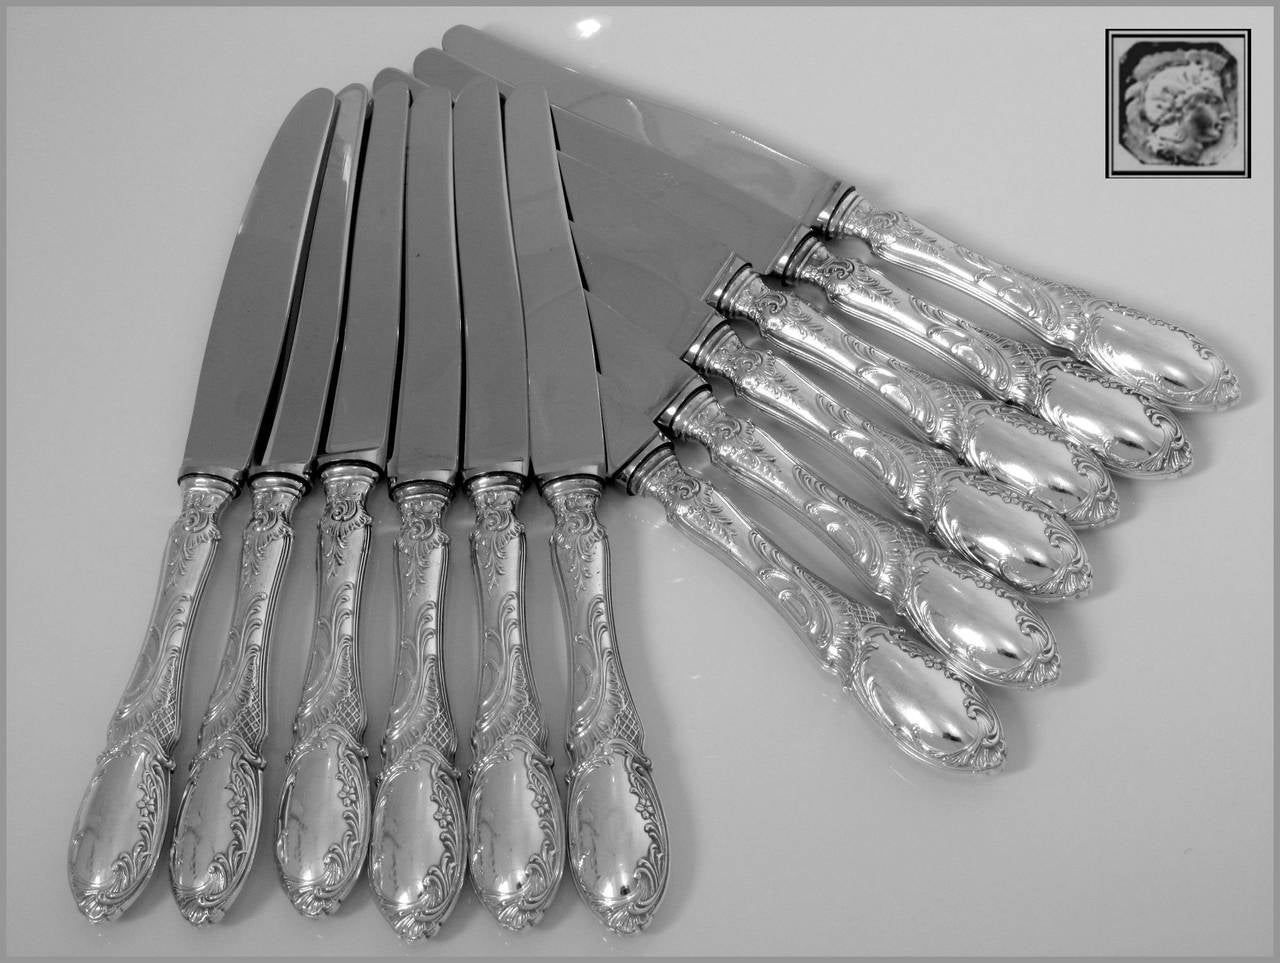 French Sterling Silver Dessert Knife Set 12 pc Rococo, Stainless Steel Blades

Head of Minerve 1 st titre on the handles for 950/1000 French Sterling Silver guarantee and Stainless Steel Blades engraved Nogent Inox.

The design and workmanship